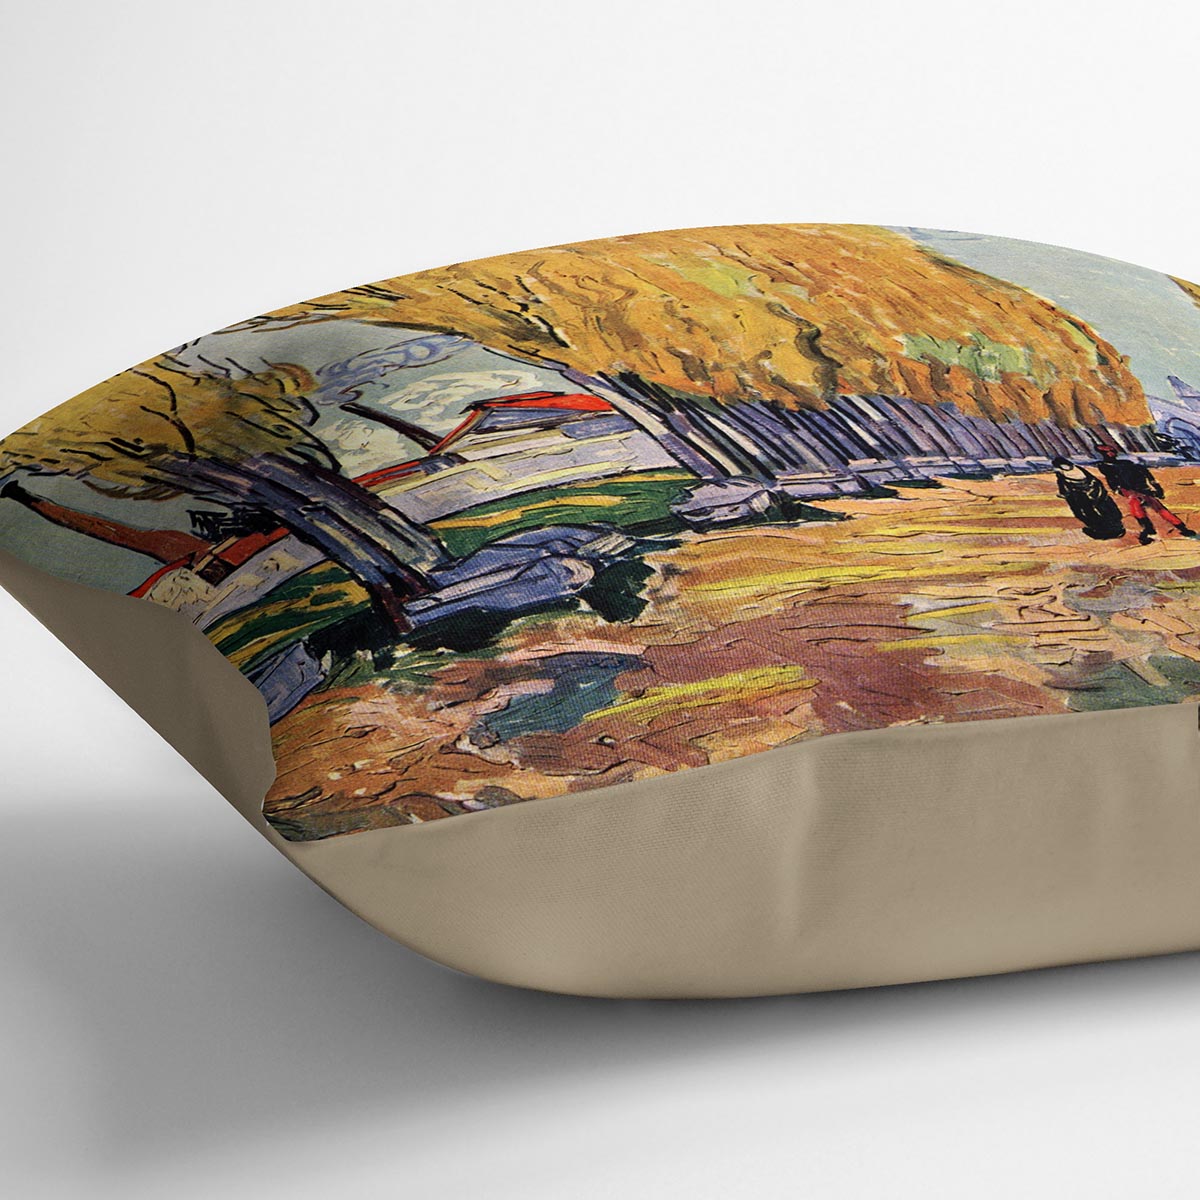 Les Alyscamps by Van Gogh Cushion